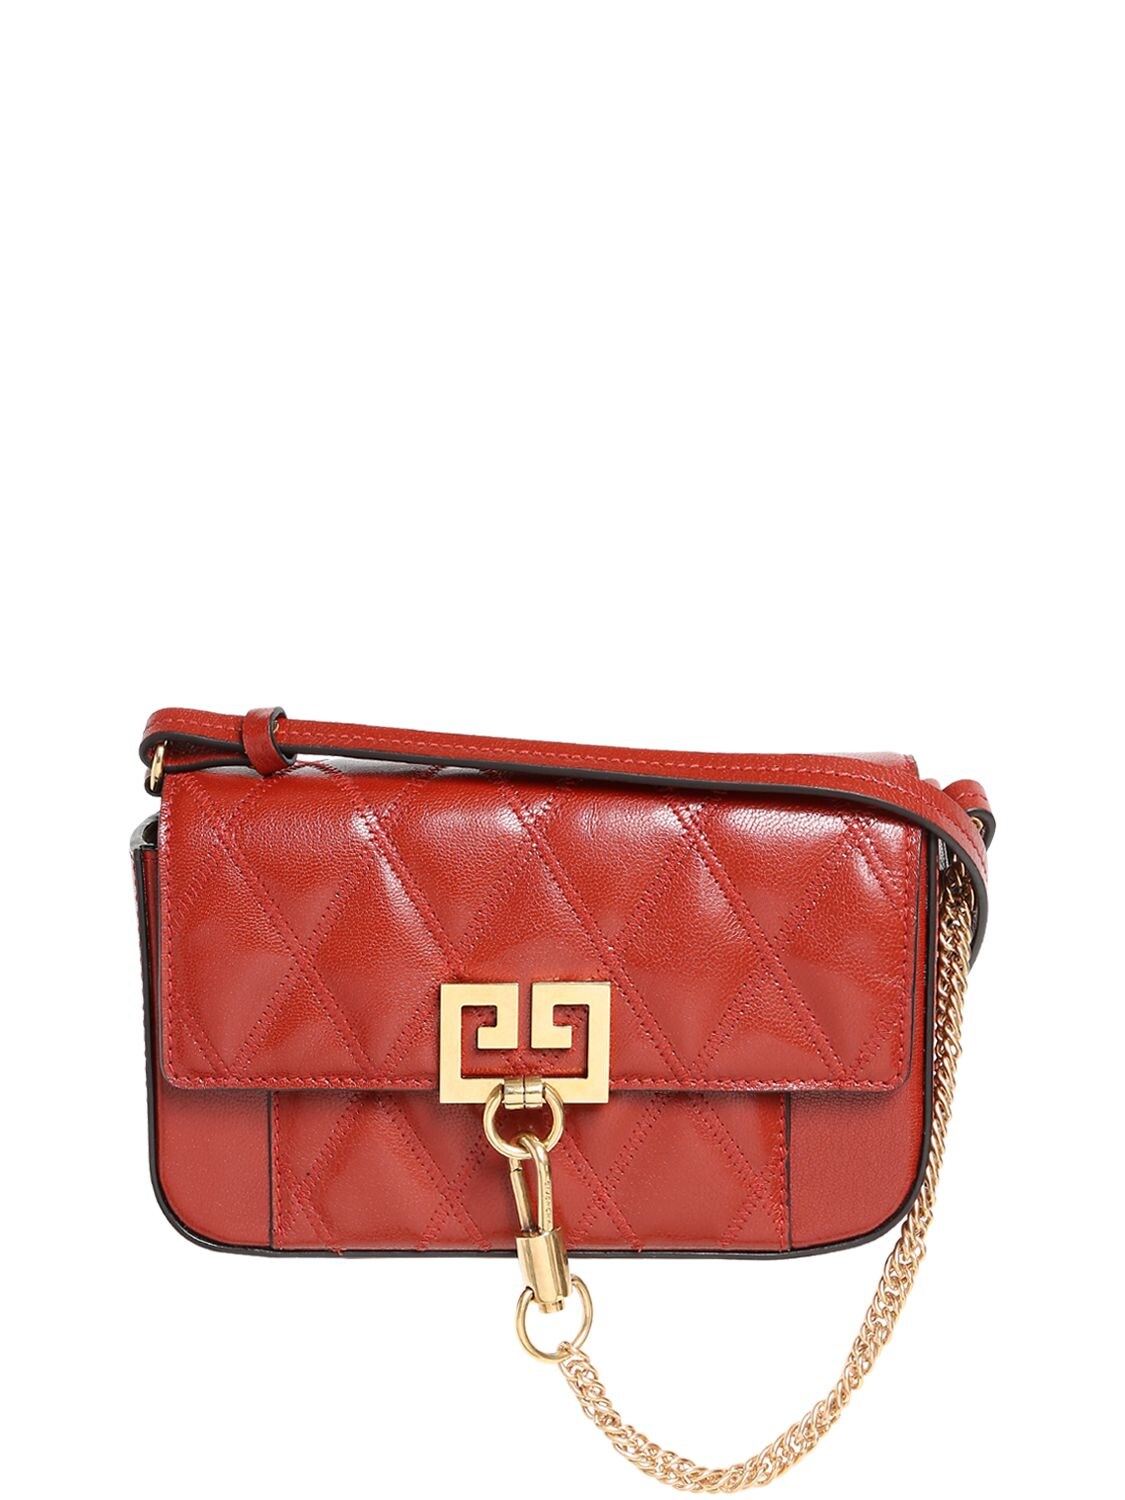 Givenchy Mini Pocket Quilted Leather Shoulder Bag In Terracotta